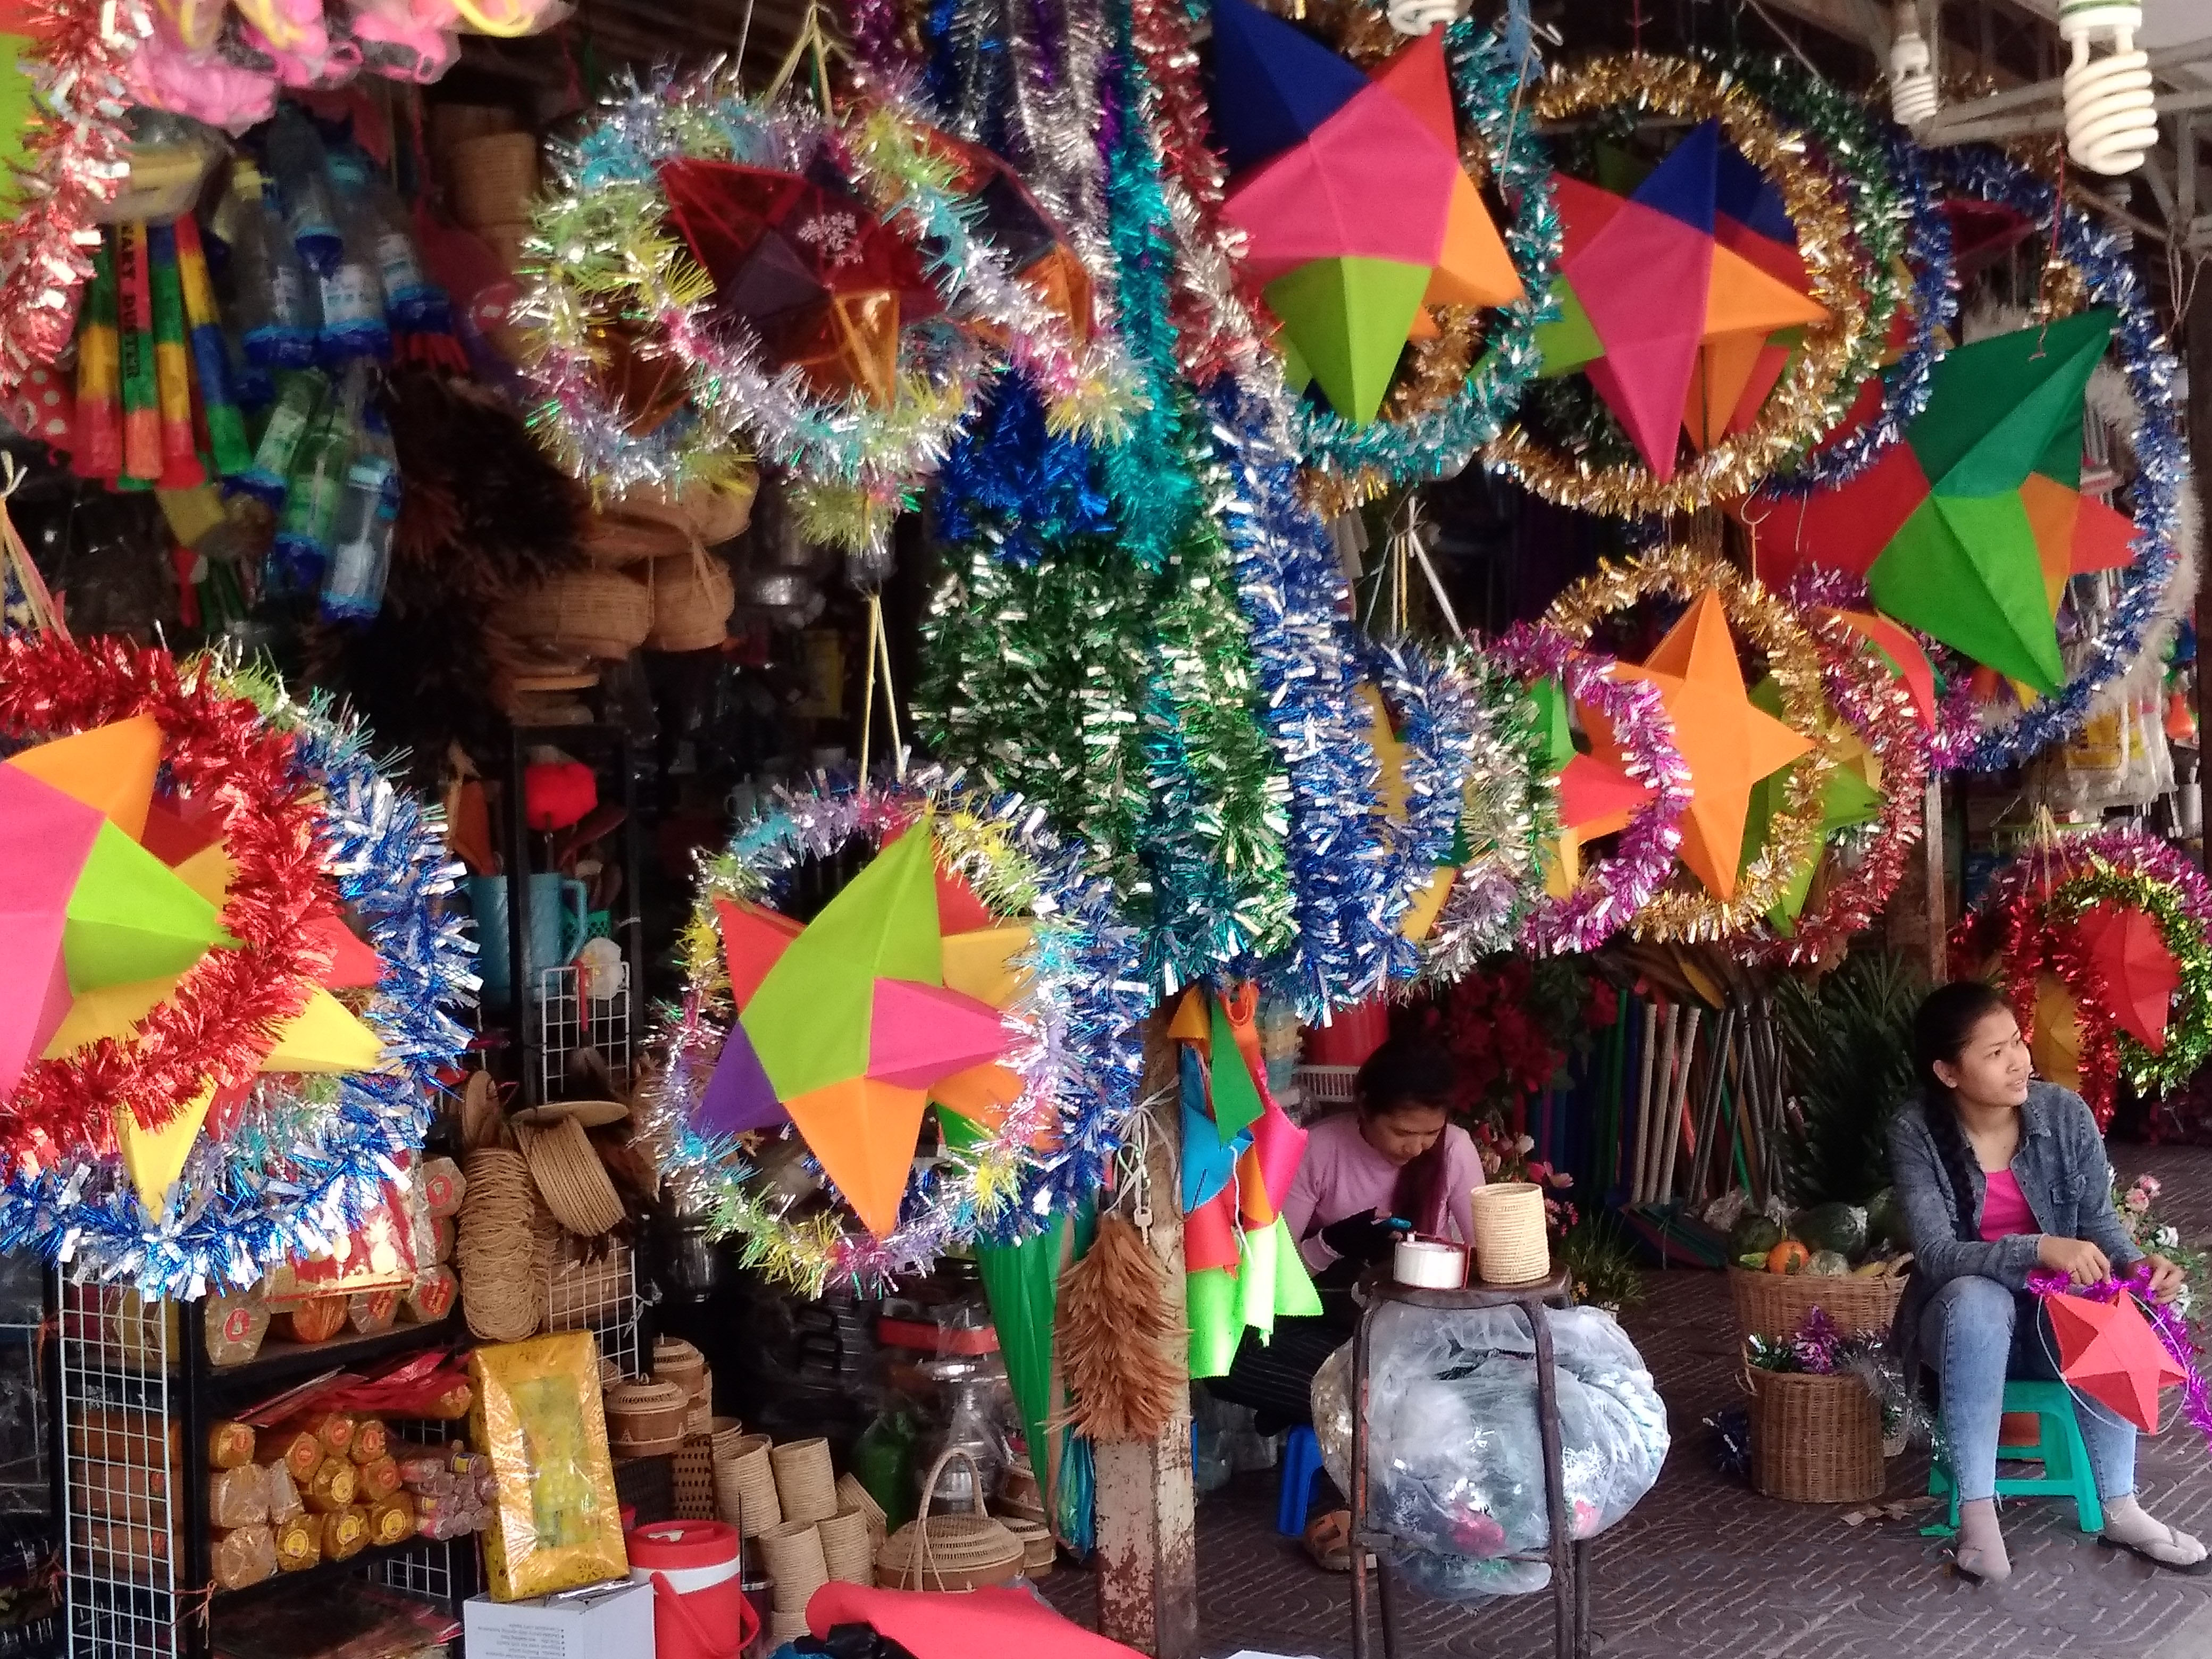 Decorations at Khmer New Year